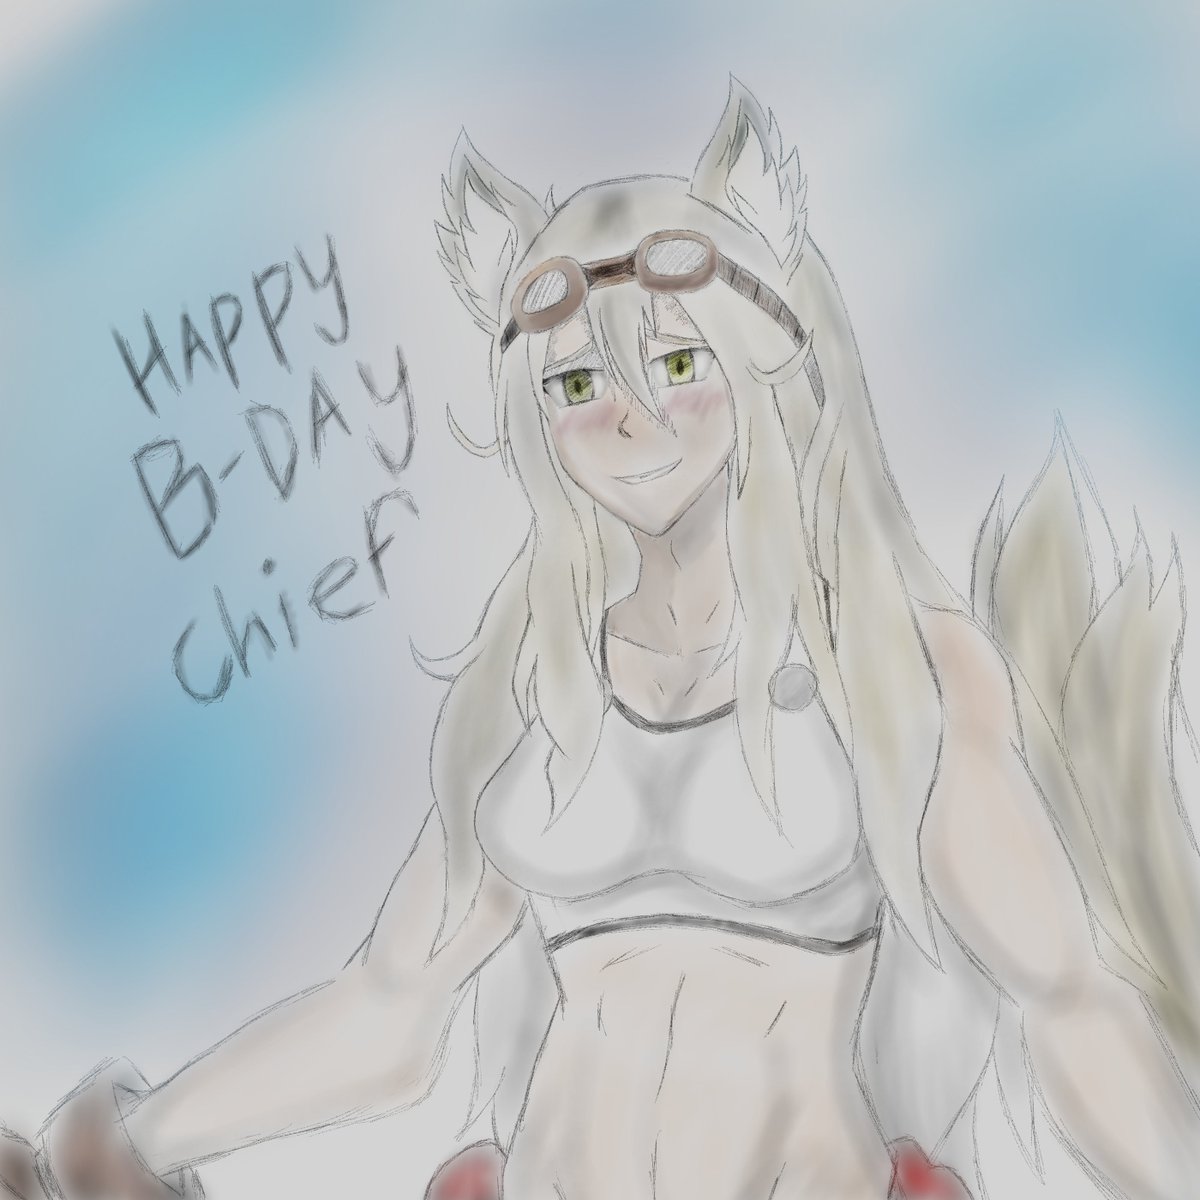 @Lost_Pause_ The stream was funny today happy birthday bro. I Been watching for a long time.